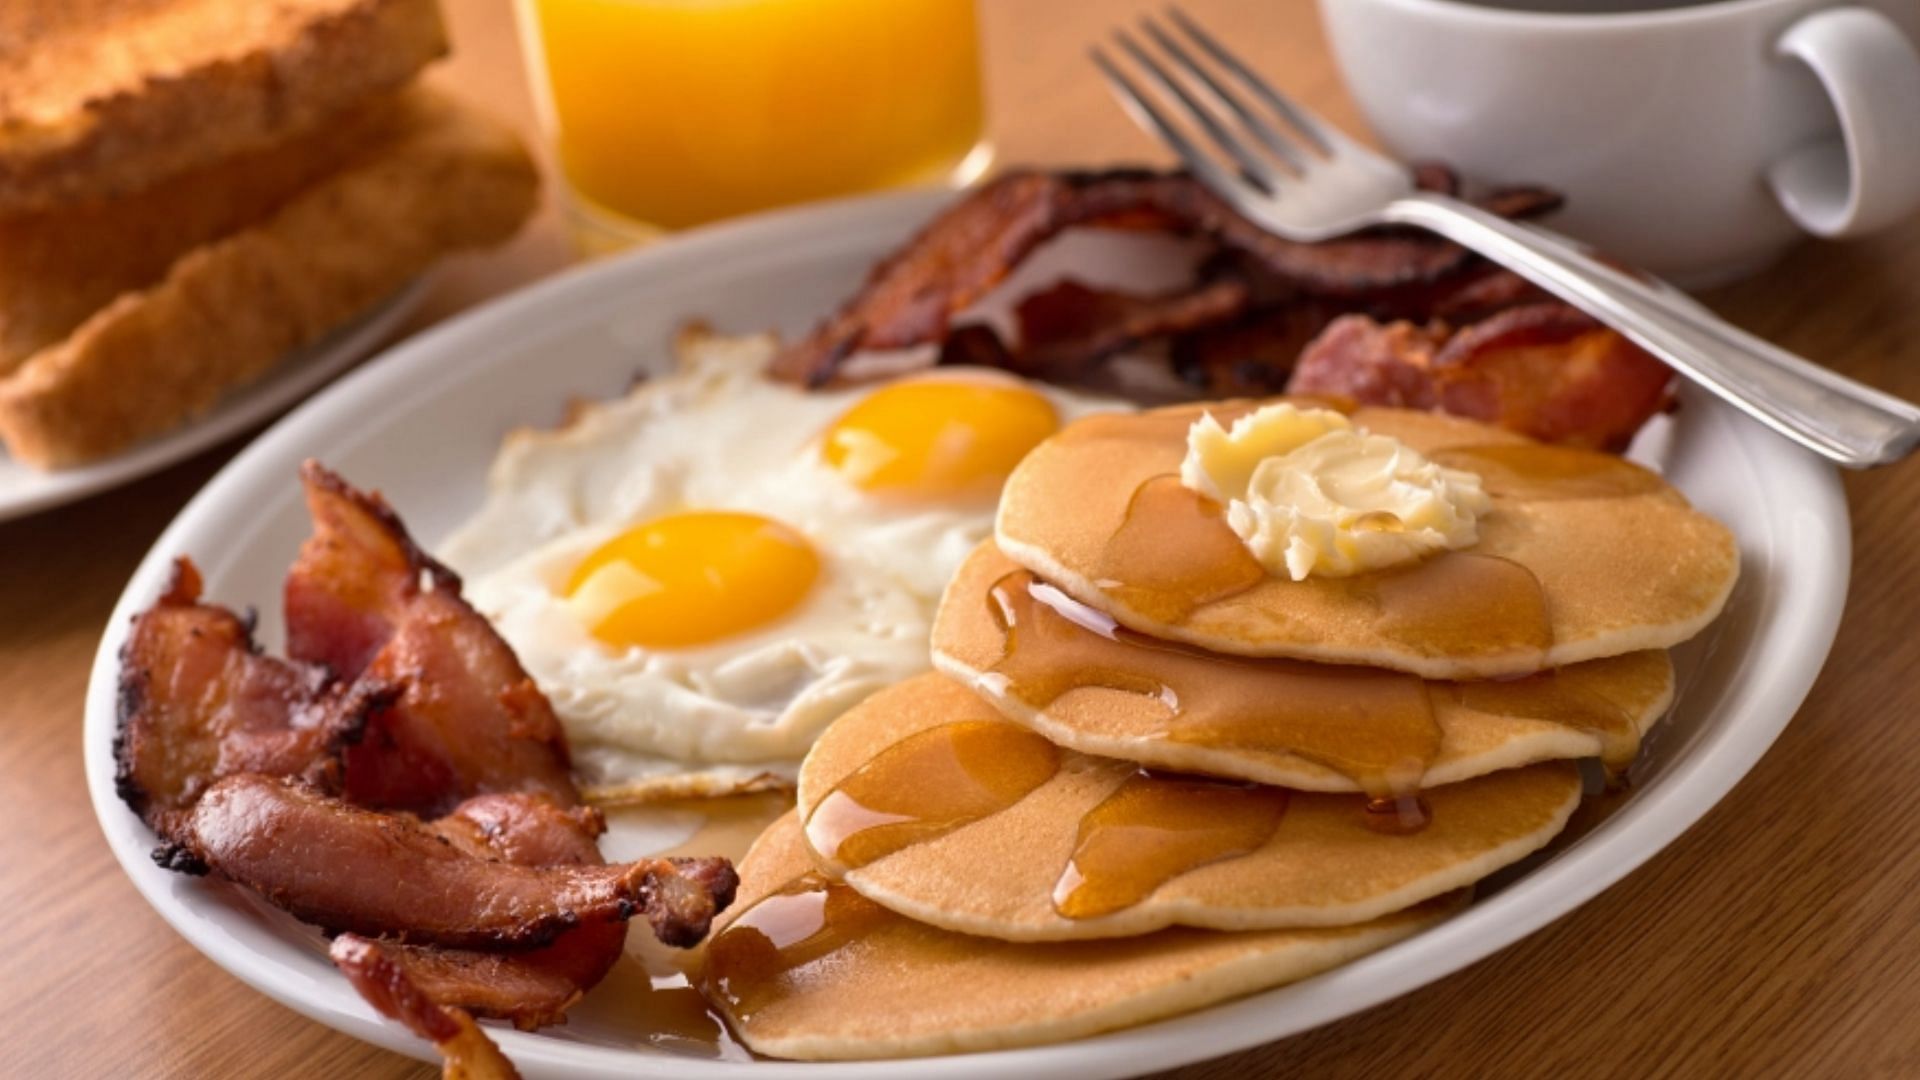 Breakfast prices are on ever high in the recent years (Image via Fudio/Getty Images)